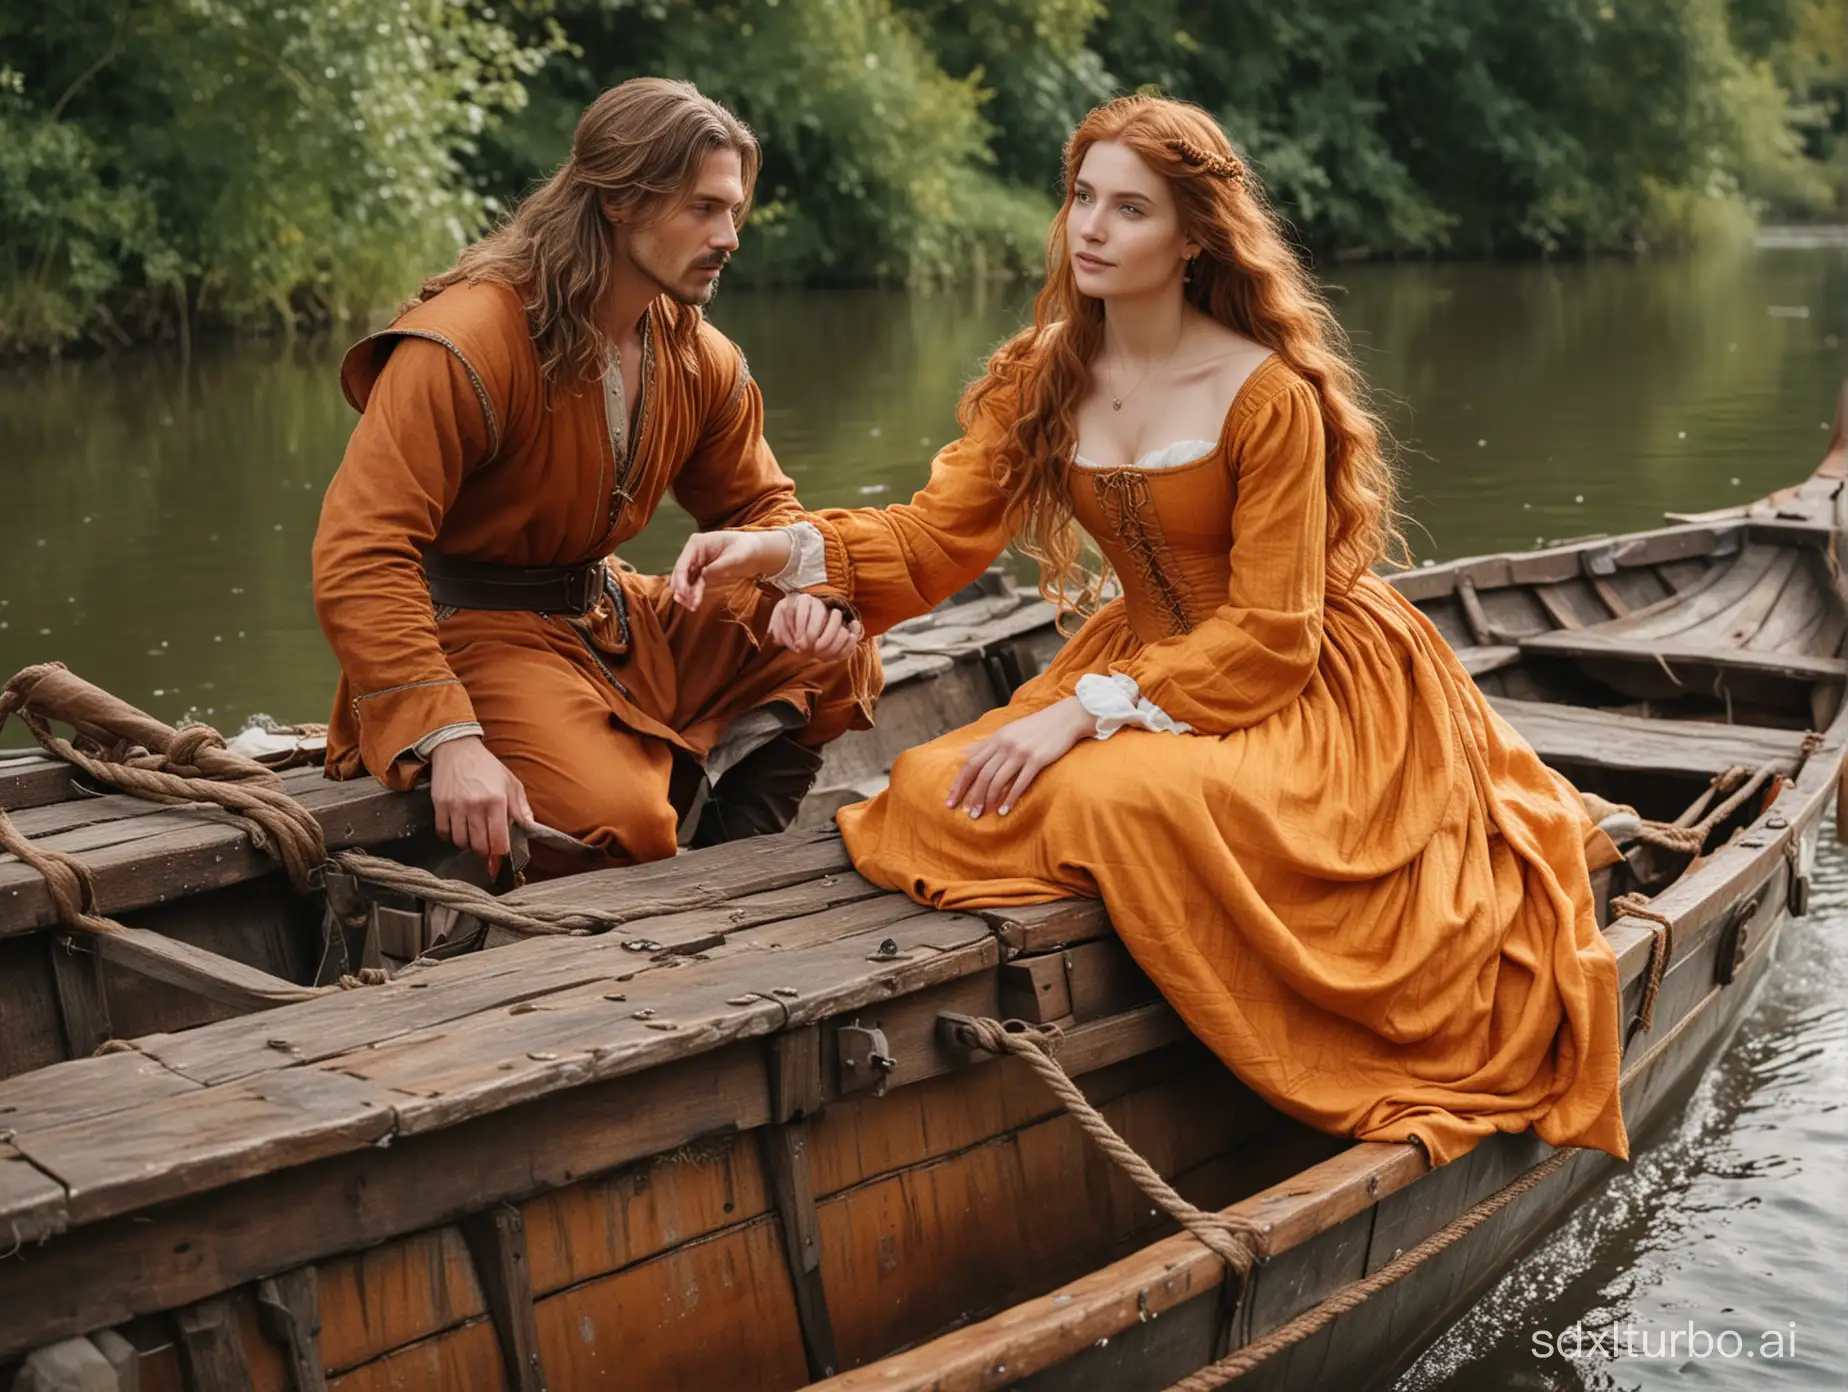 Medieval-Romance-Handsome-Man-and-RussetHaired-Girl-by-the-River